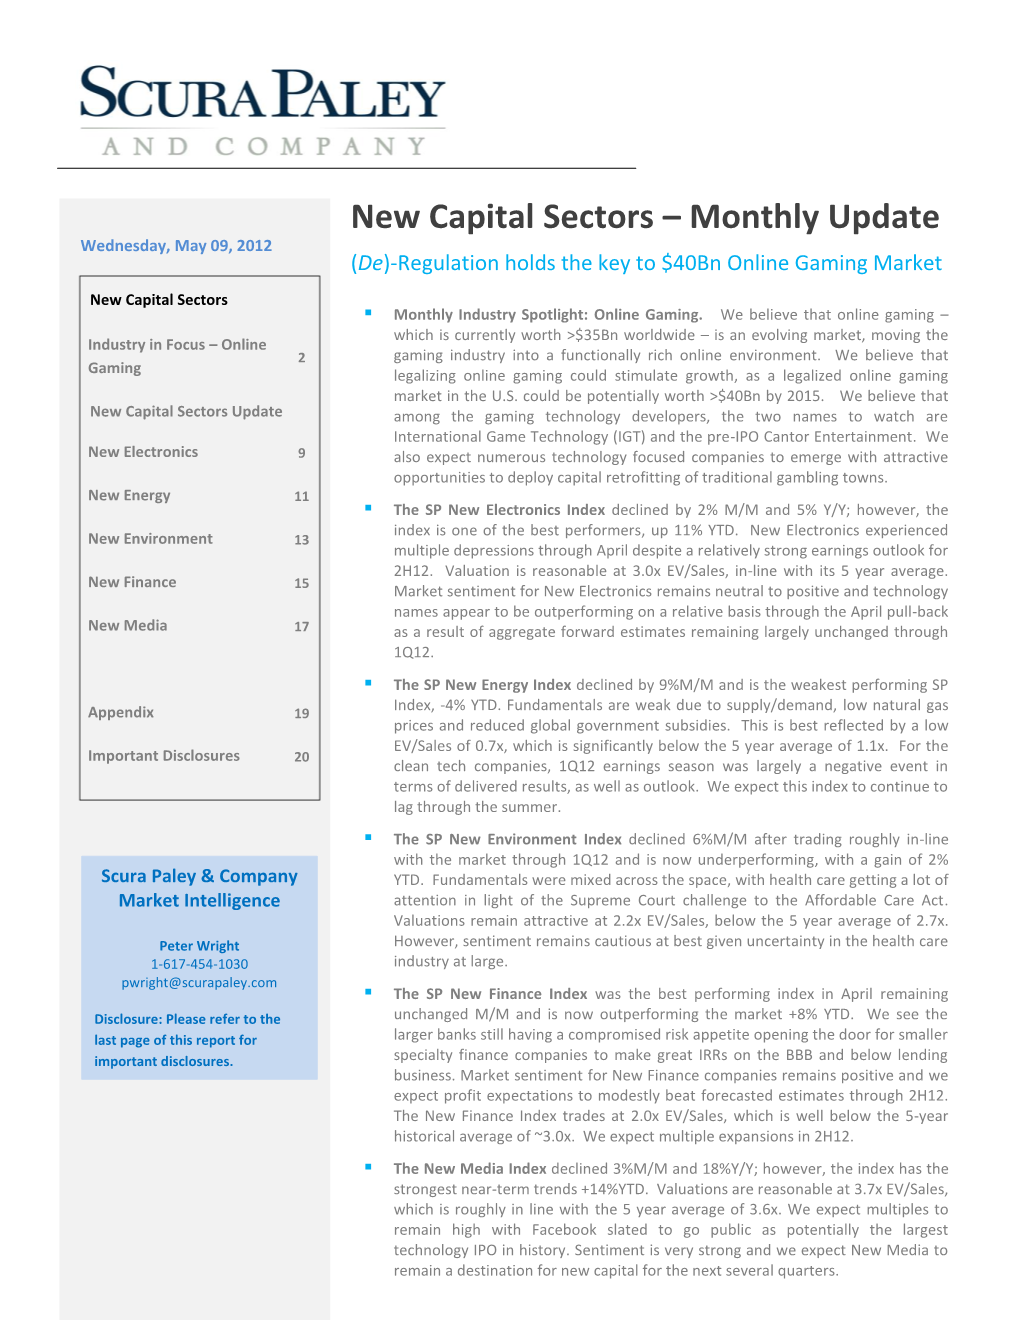 New Capital Sectors – Monthly Update Wednesday, May 09, 2012 (De)-Regulation Holds the Key to $40Bn Online Gaming Market